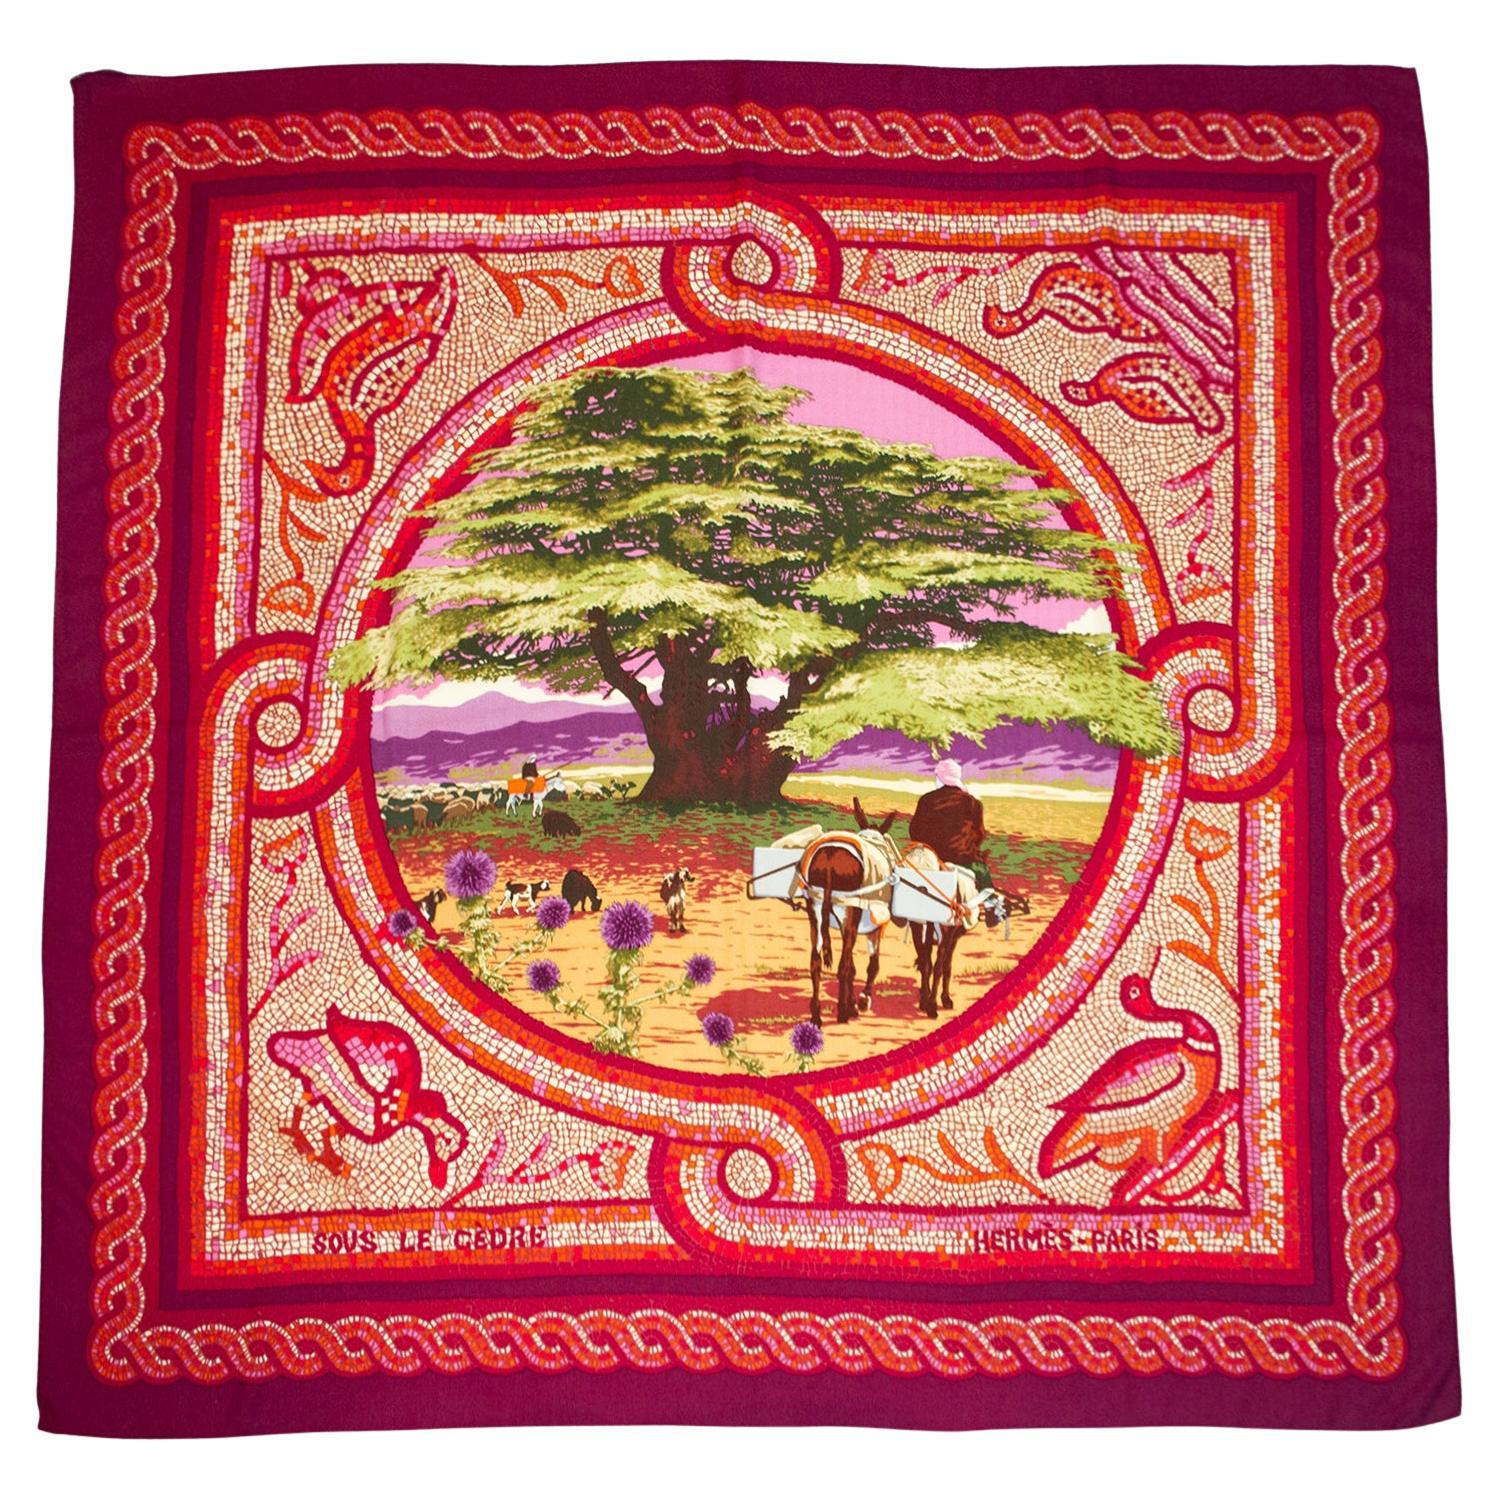 Hermes "Sous le Cedre" Silk and Cashmere Large Scarf by Dimitri Rybaltchenko 